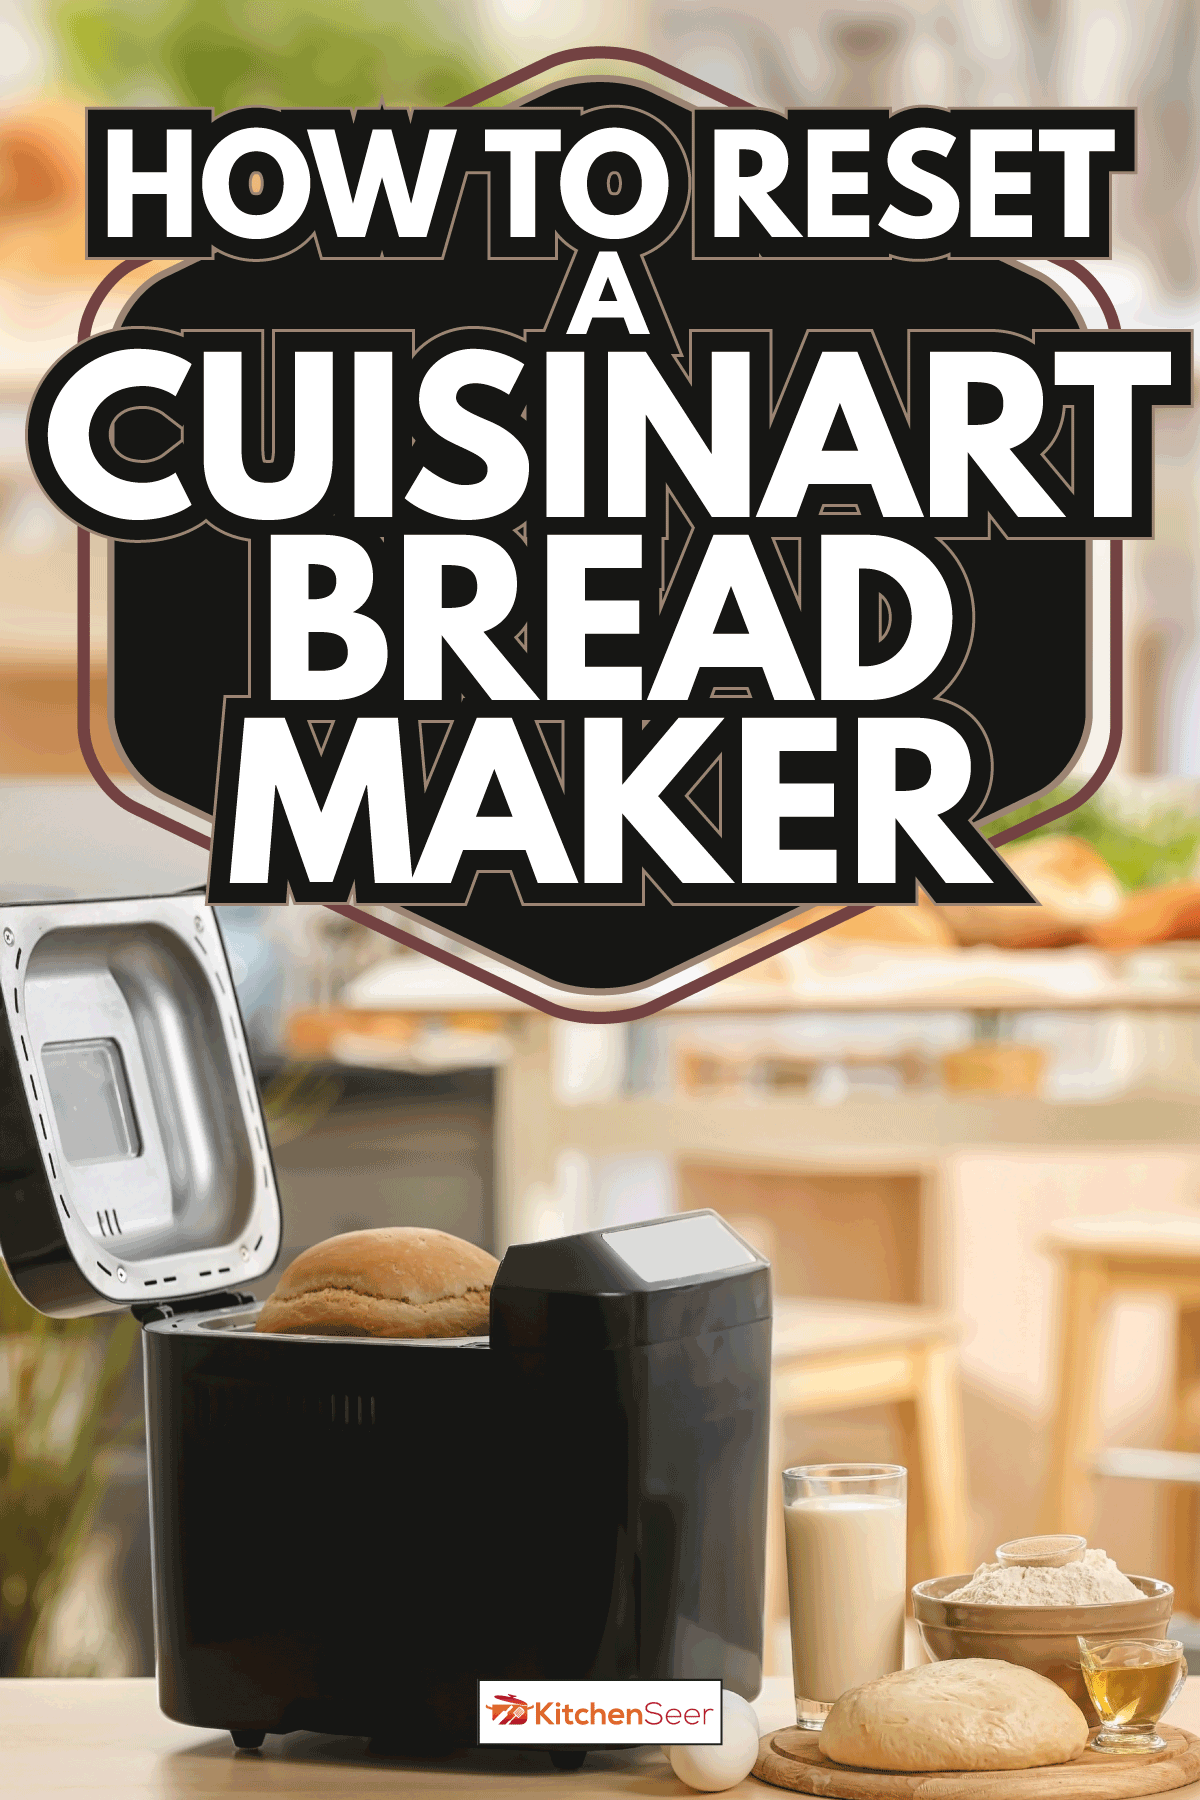 Tasty loaf in bread machine. How To Reset A Cuisinart Bread Maker